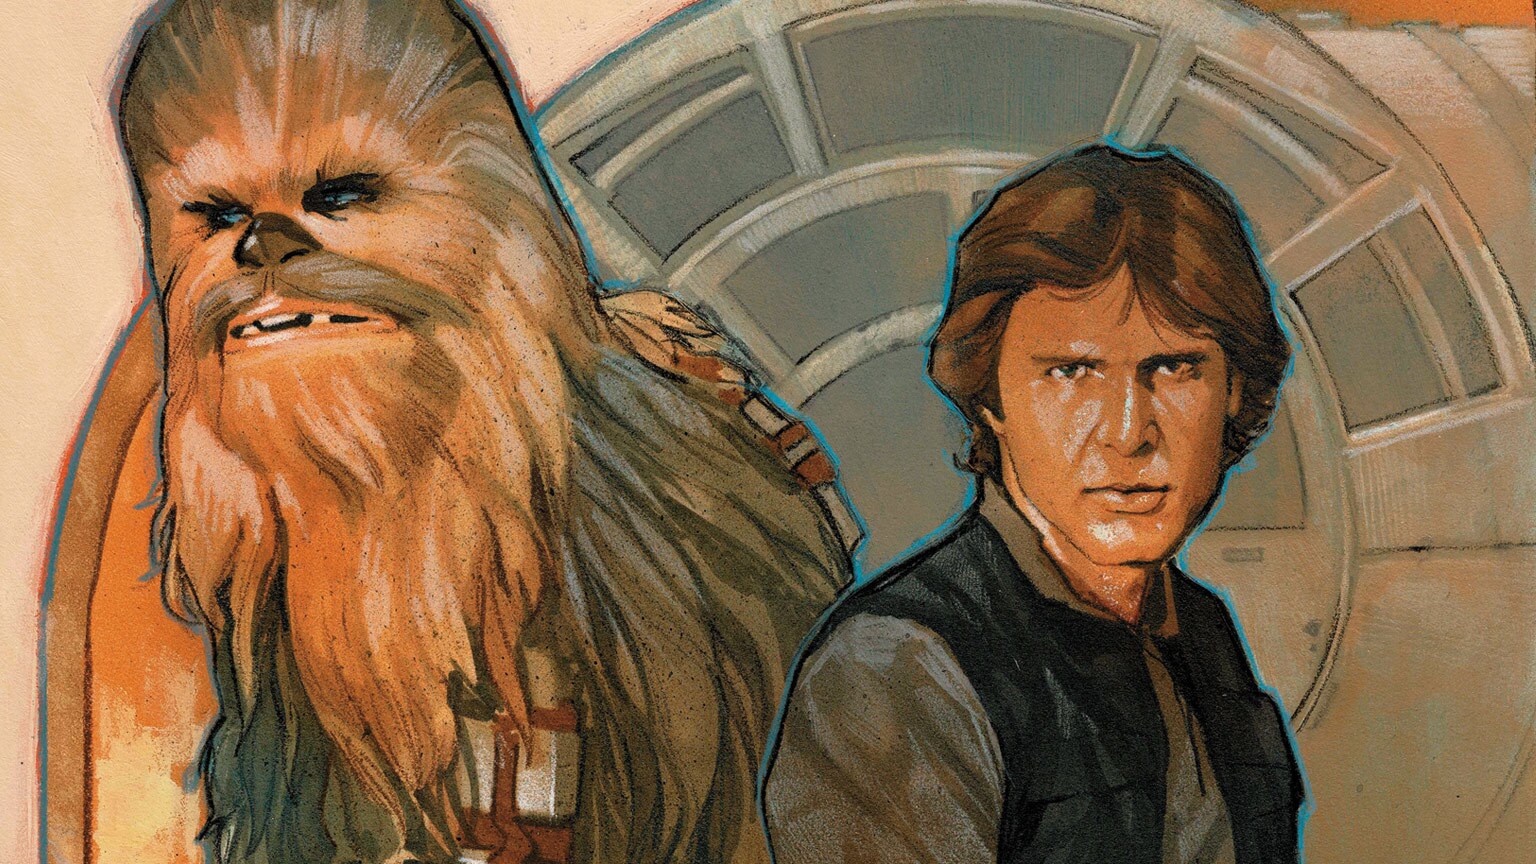 Marvel’s Han Solo & Chewbacca Series Coming March 2022 - Exclusive